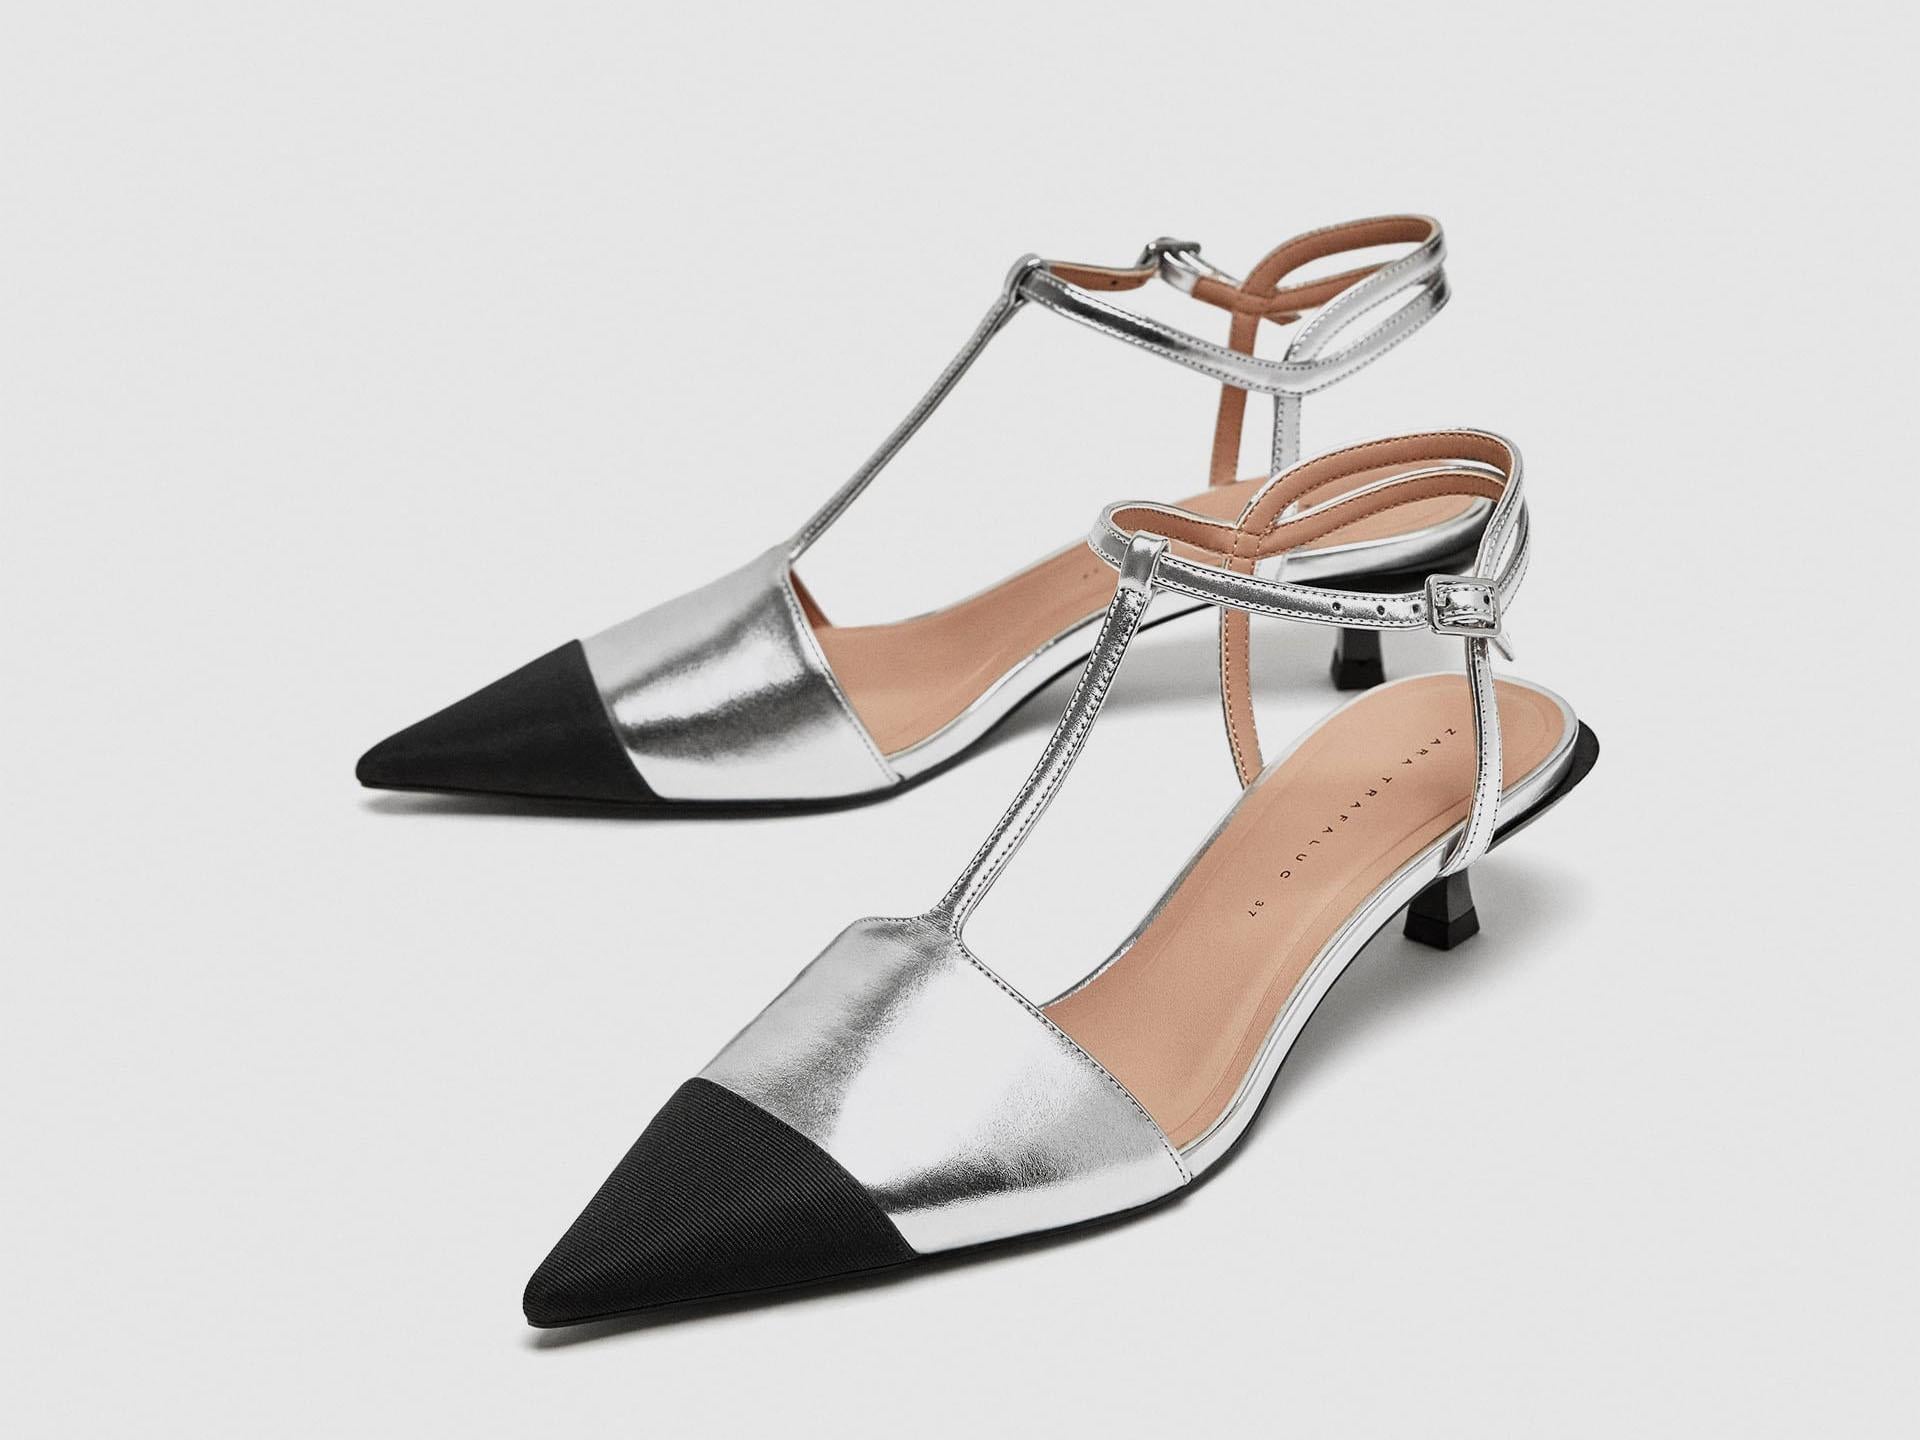 The T-Bar Court Shoes are complimented by their shiny appeal, £25.99, Zara